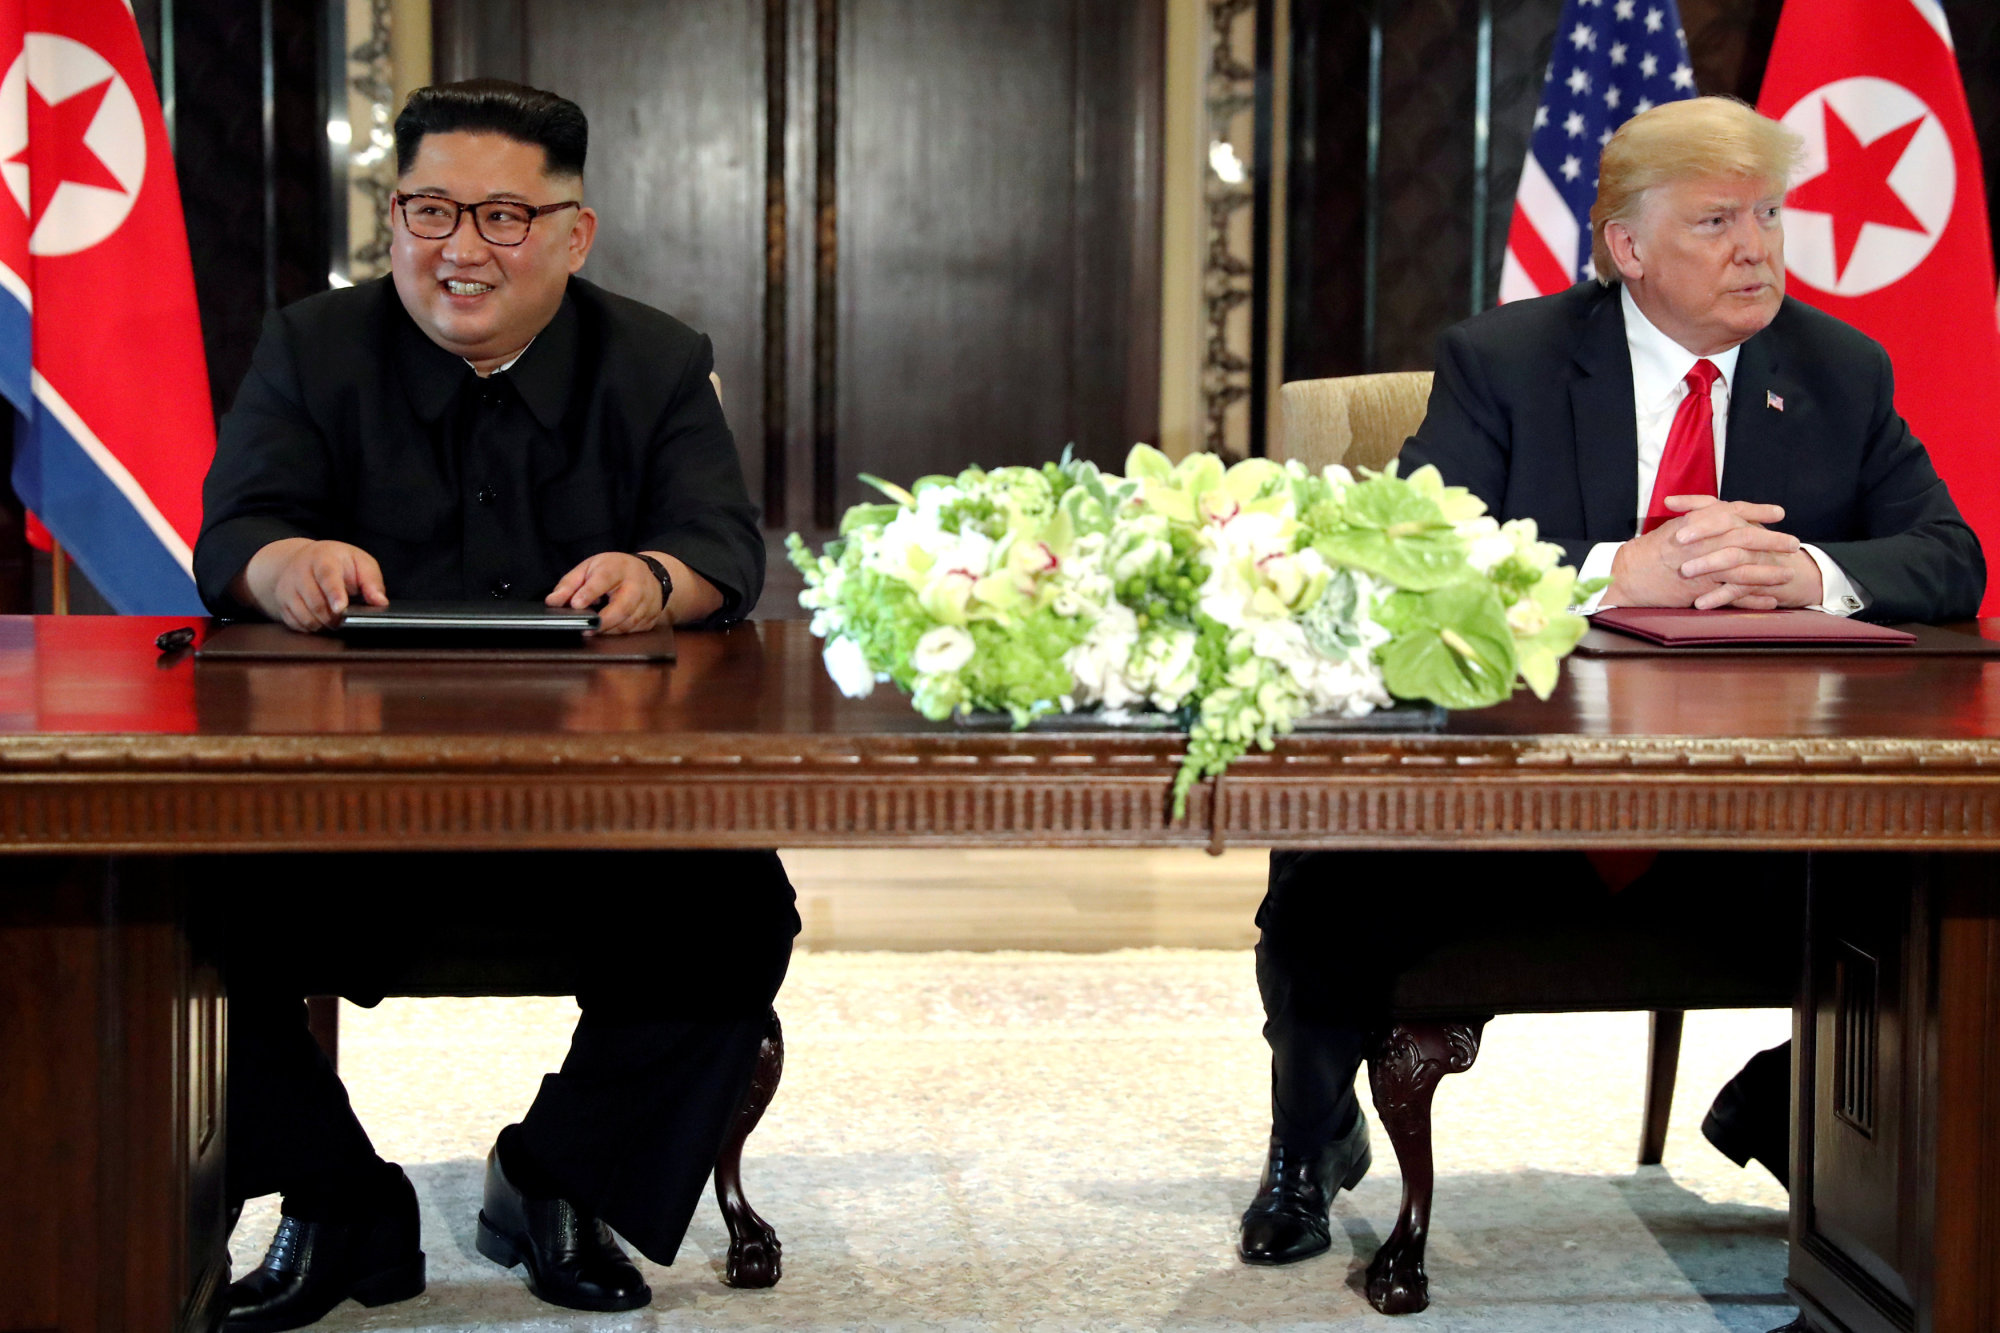 U.S. President Donald Trump and North Korea's leader Kim Jong Un hold a signing ceremony after their first meeting in Singapore on June 12. A South Korean newspaper reported Japan is ready to host a second U.S.-North Korea summit meeting. | REUTERS